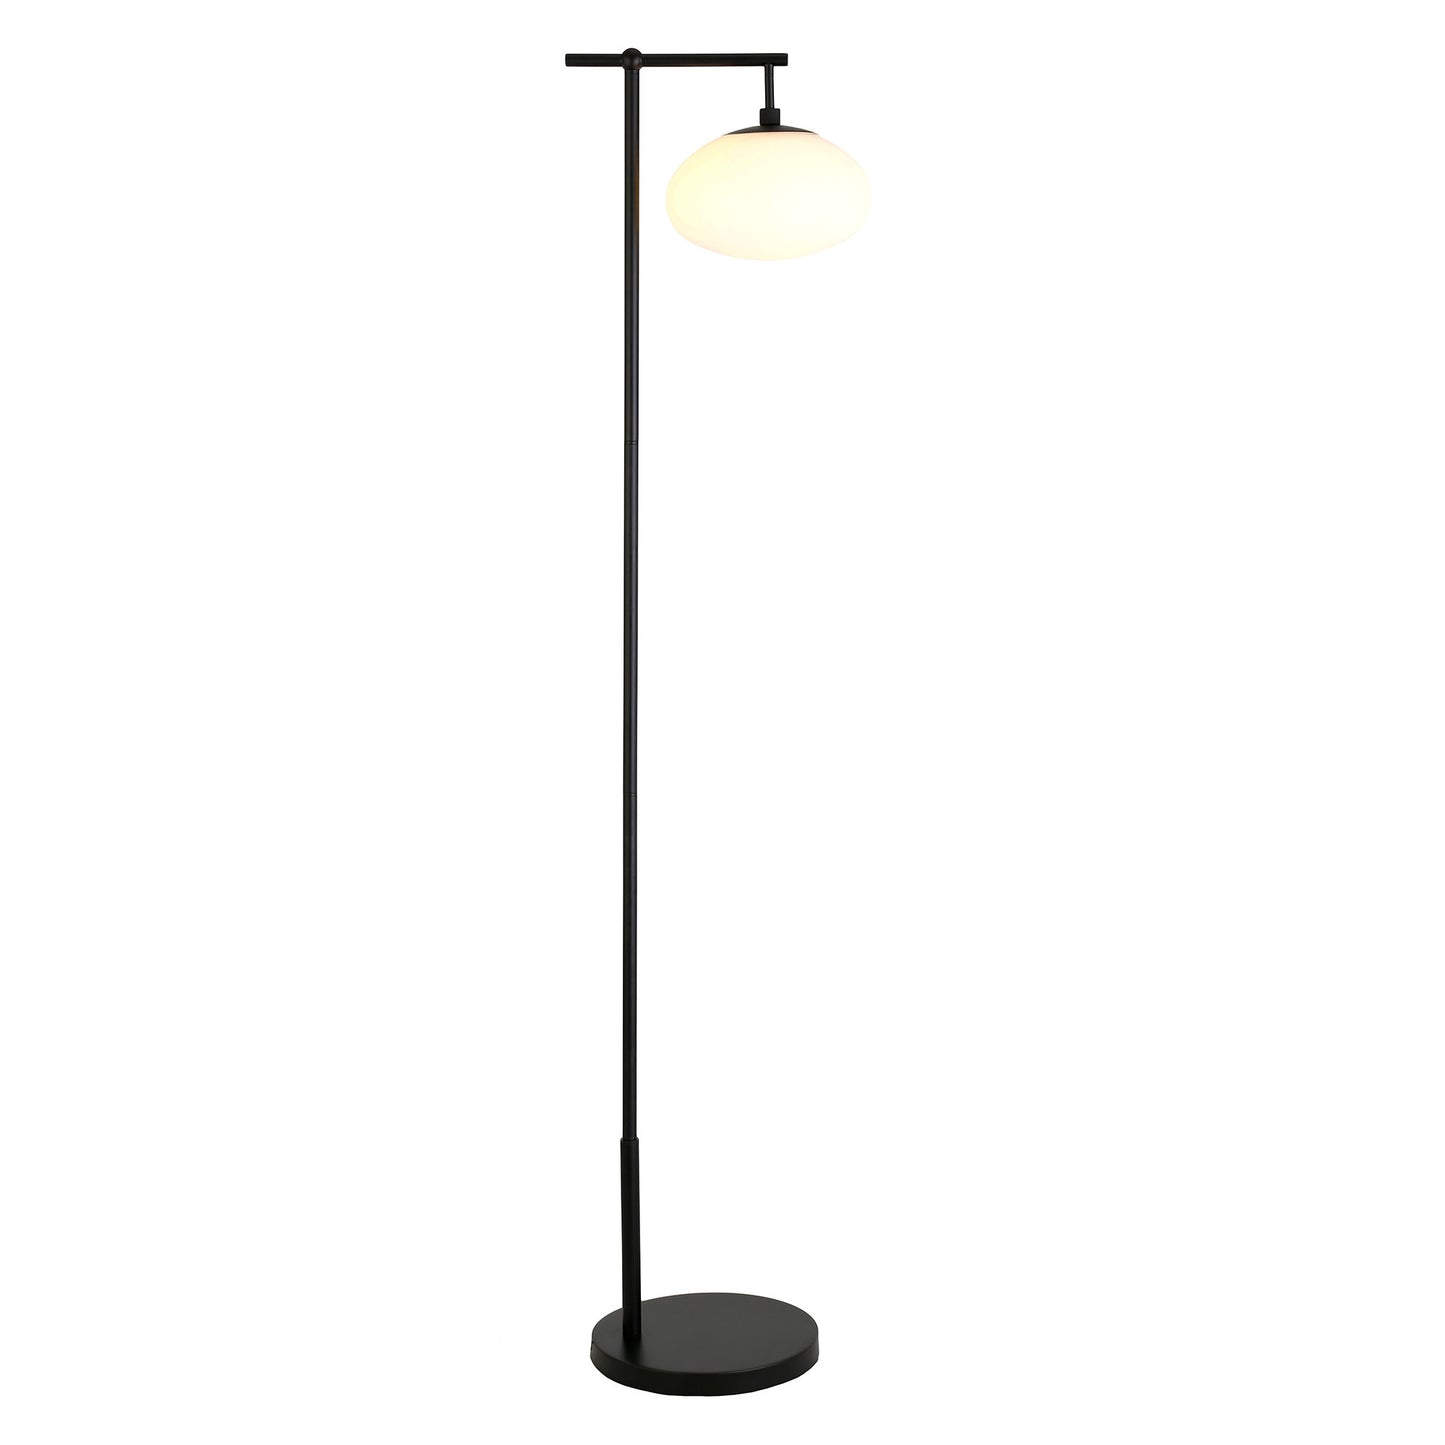 68" Black Reading Floor Lamp With White Frosted Glass Globe Shade